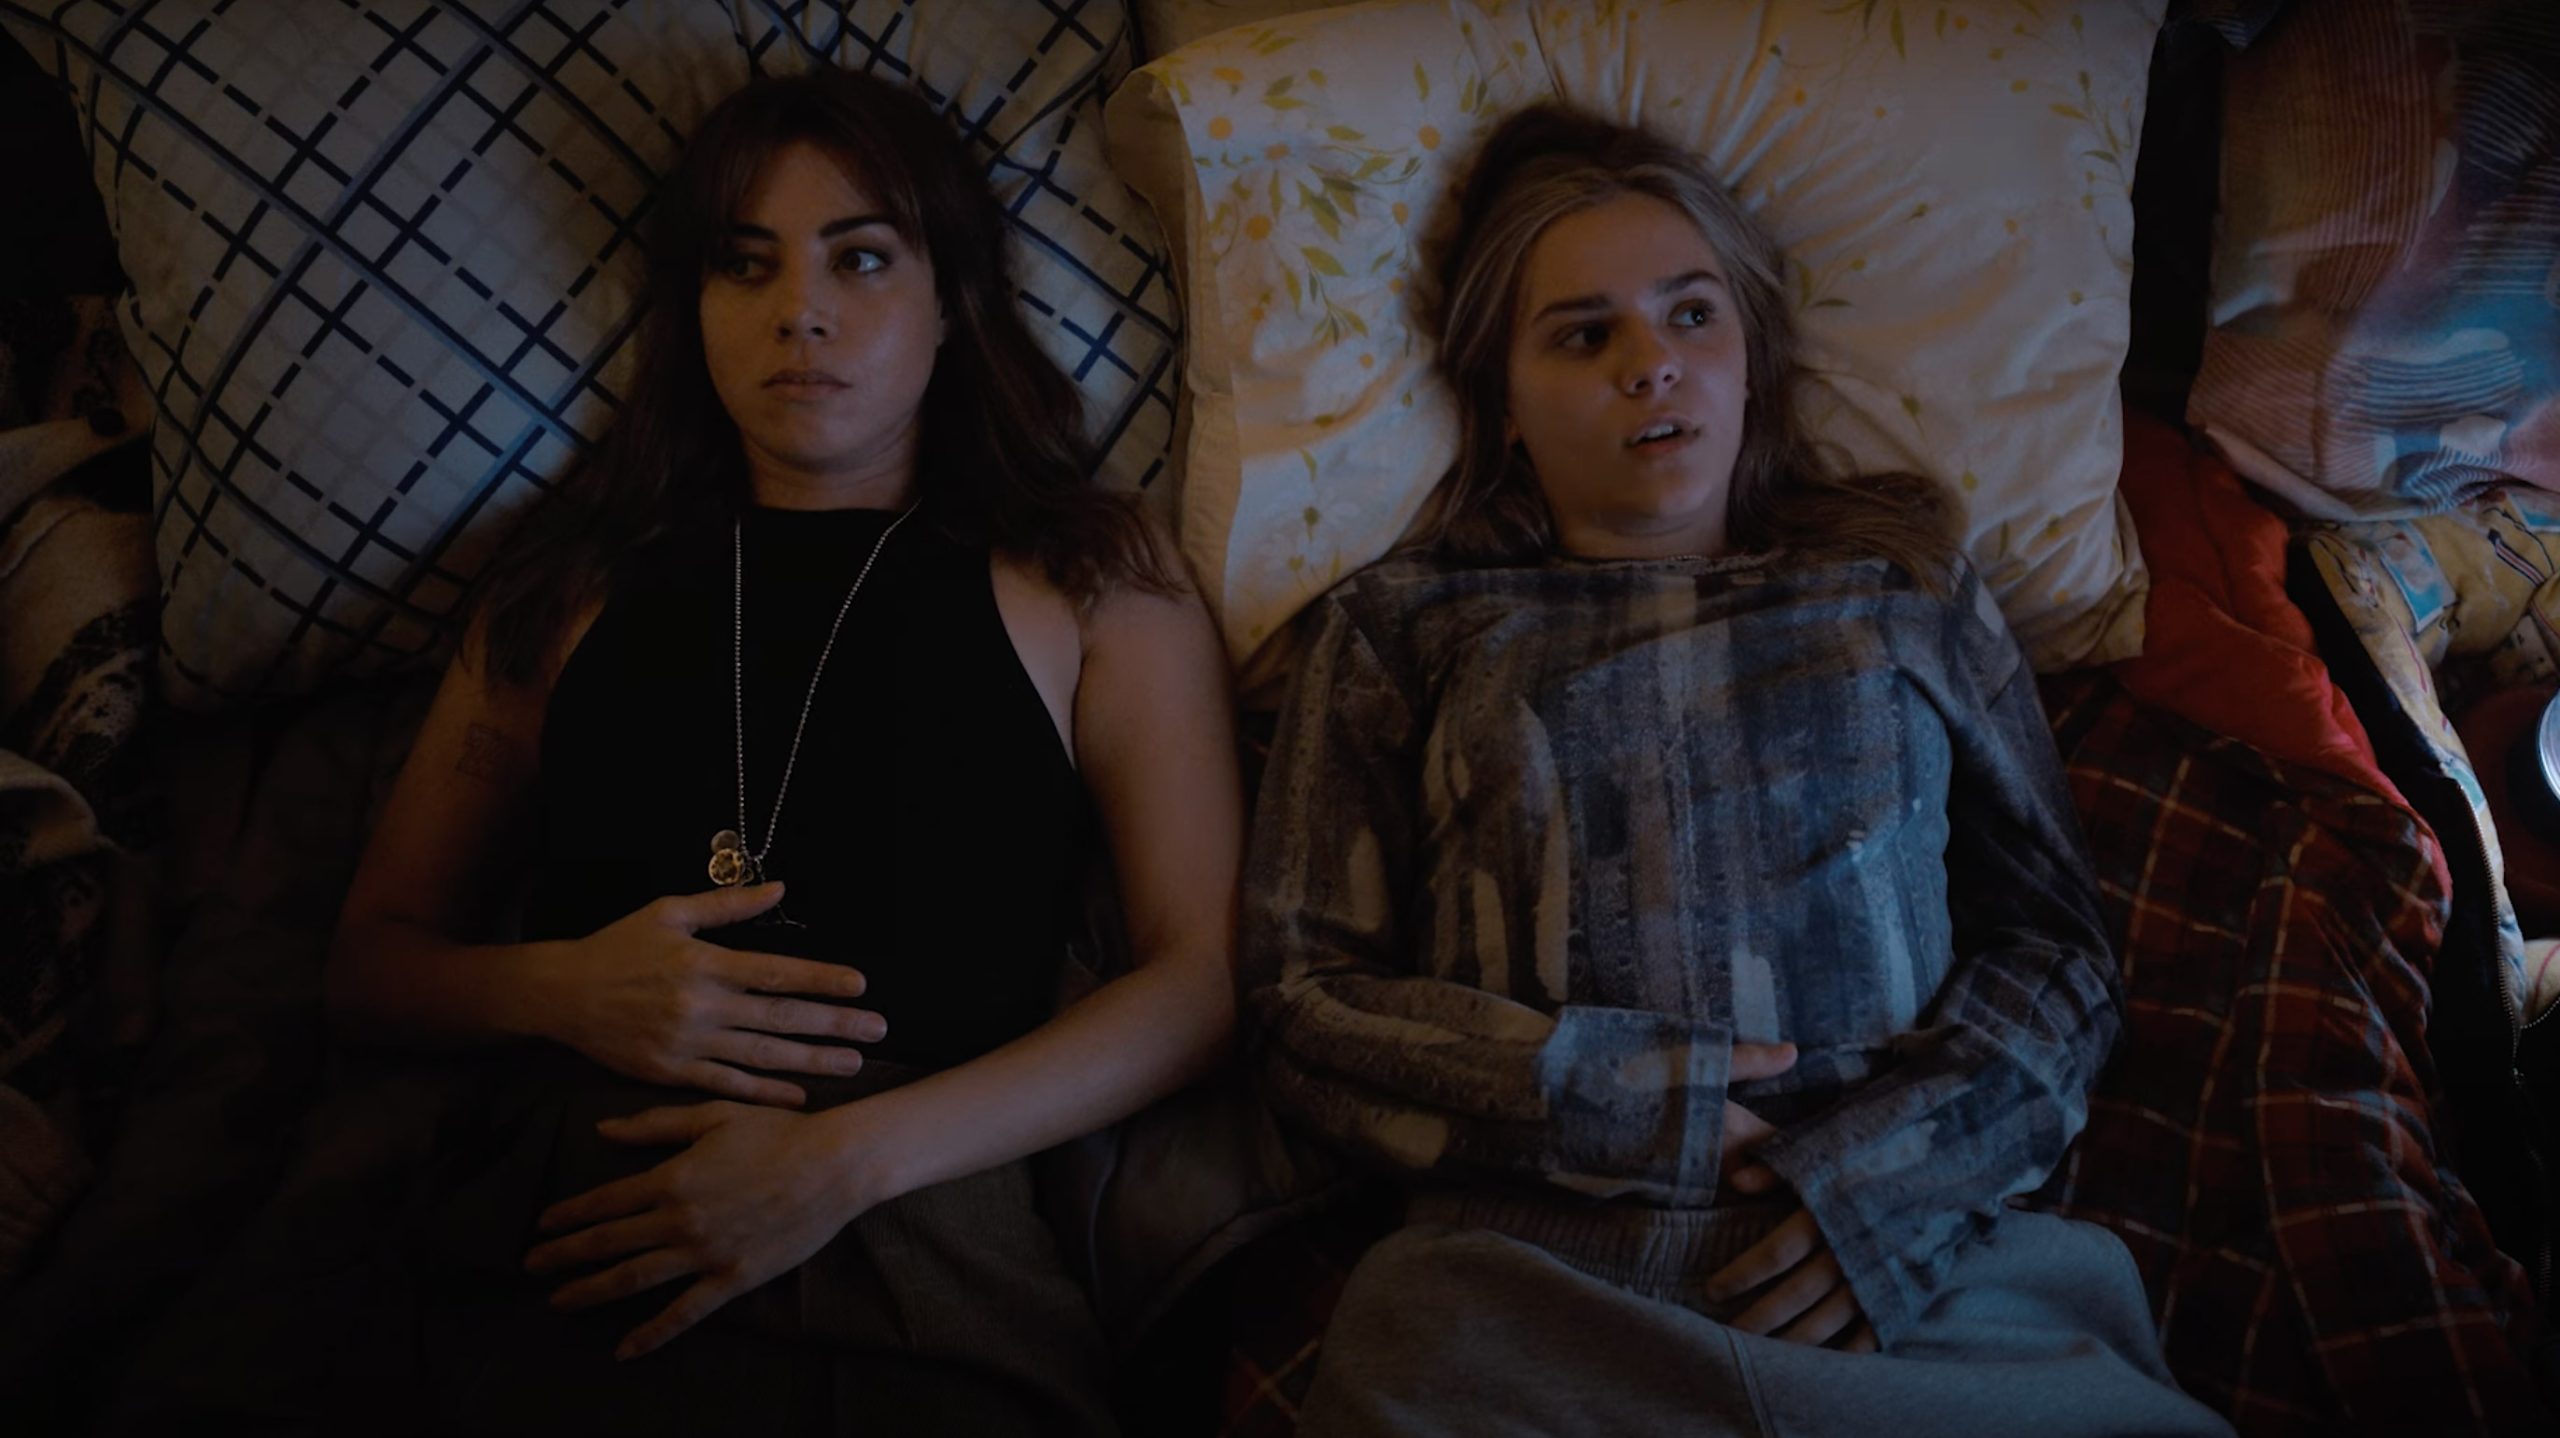 New Trailer for Coming-of-Age Comedy My Old Ass with Maisy Stella and Aubrey Plaza